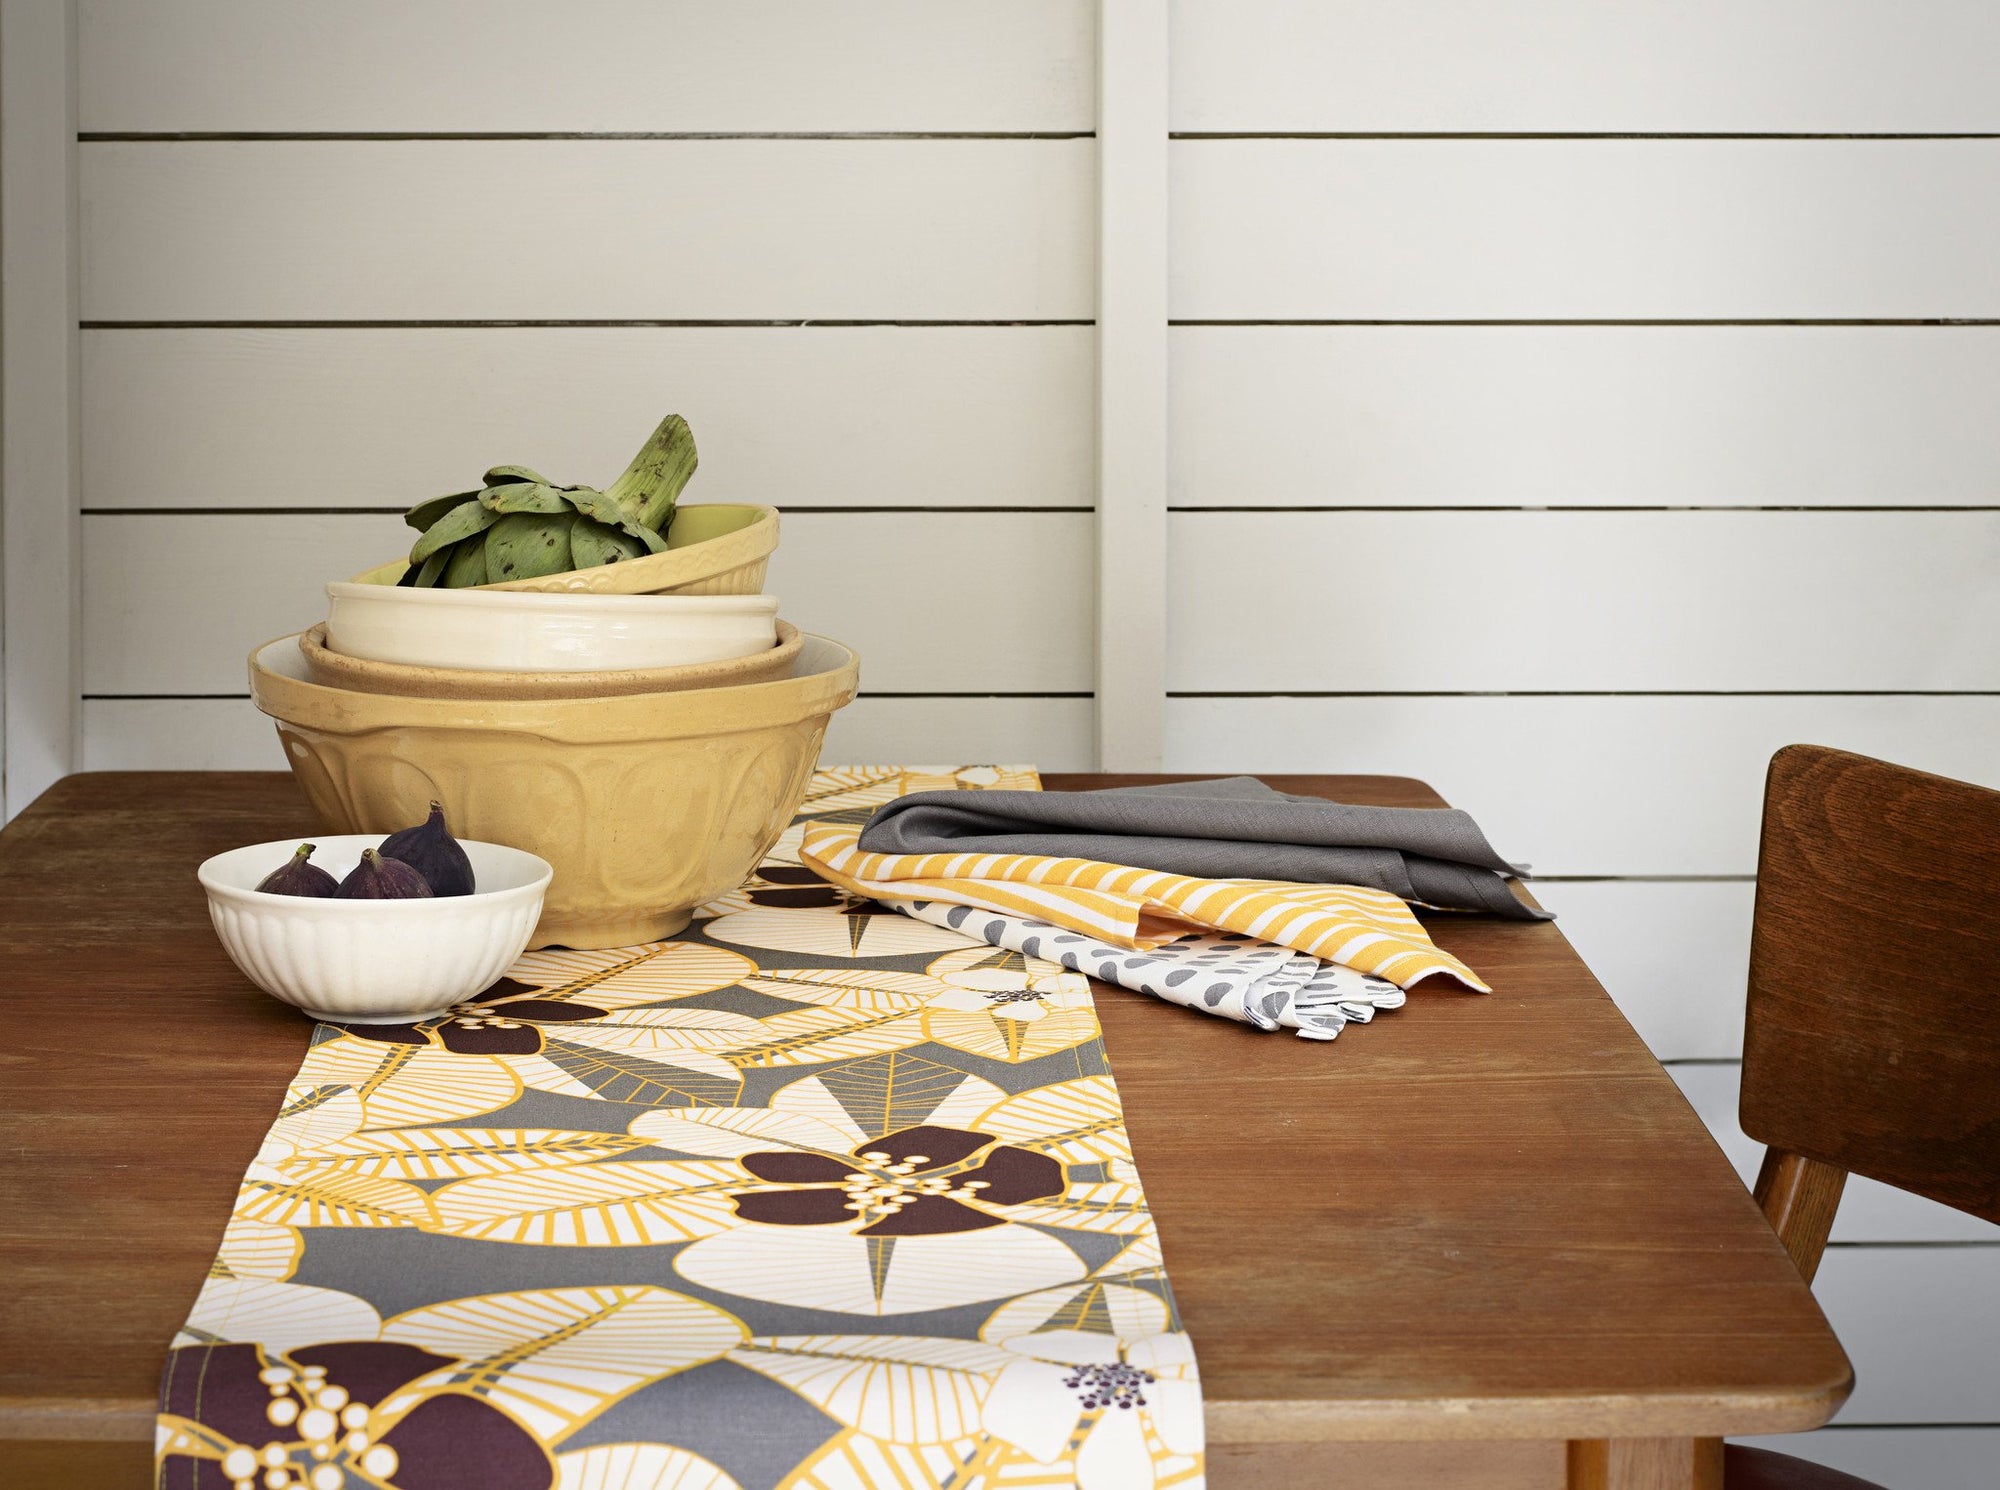 Cotton linen tablecloths, napkins and table runners in bold, modern patterns and stripes in shades of yellow. Ships from Canada worldwide including the USA